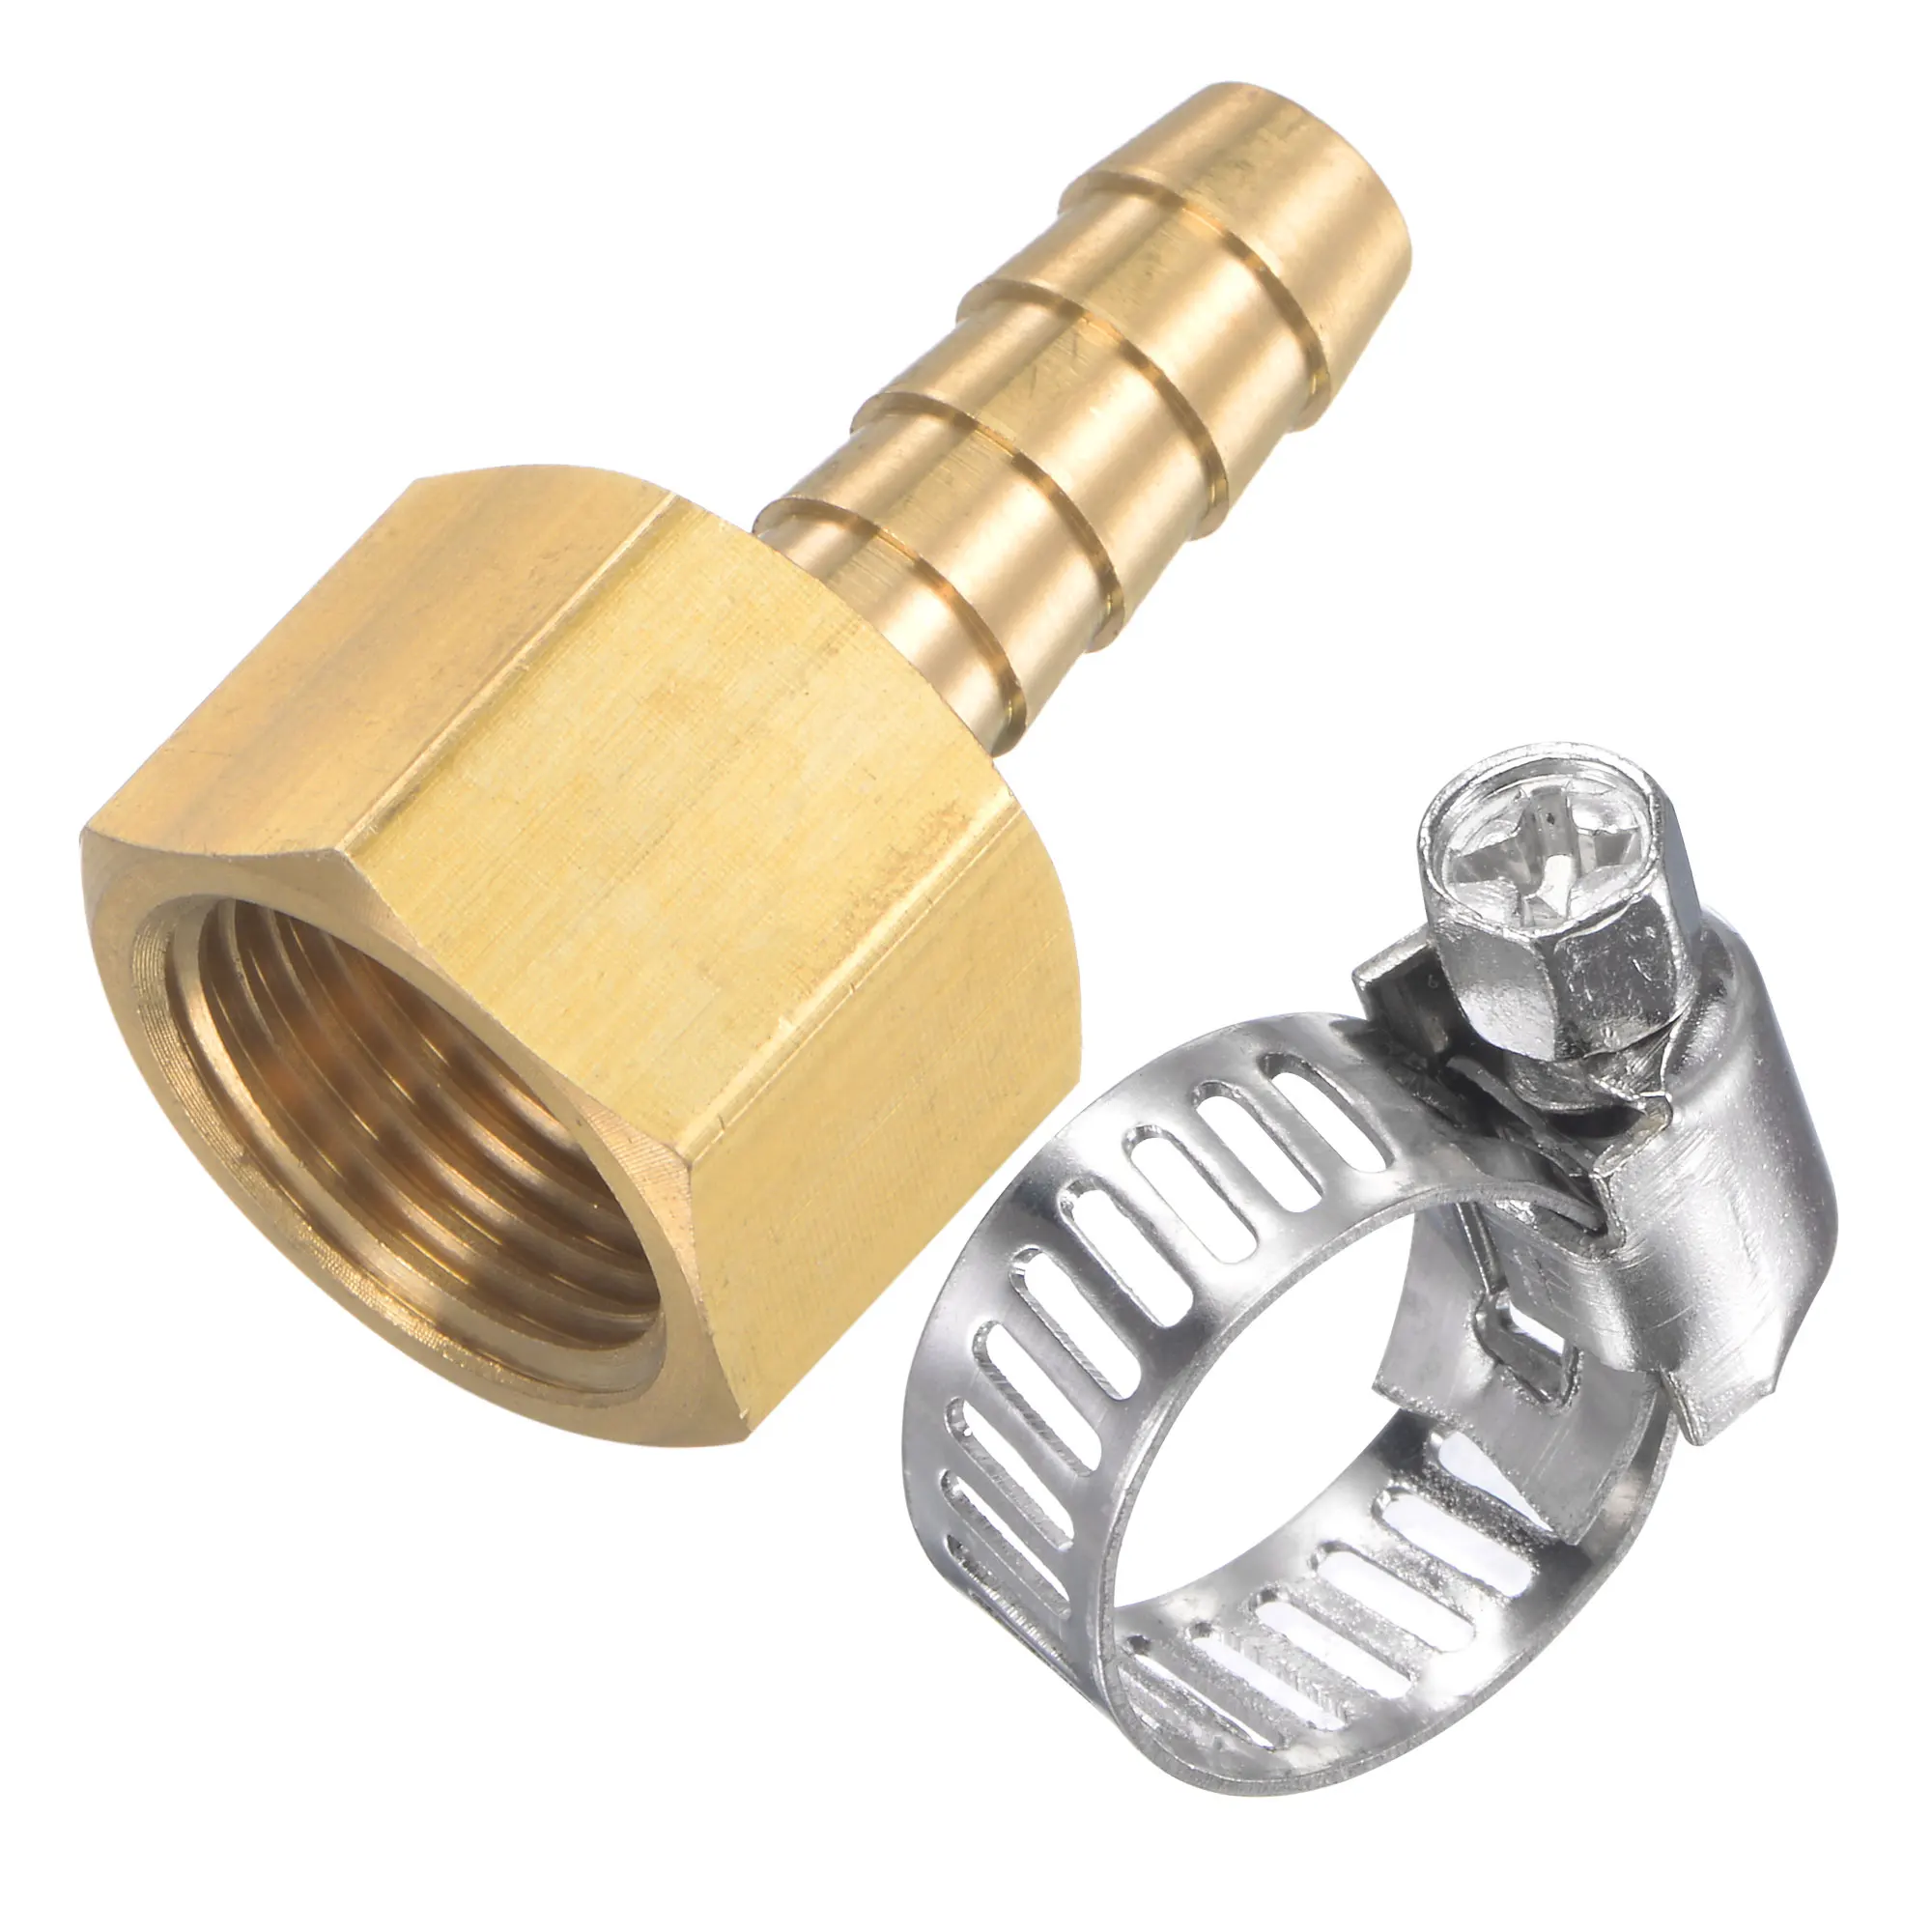 

Uxcell Brass Hose Fitting 3/8NPT Female Thread x 5/16 Inch OD Barb Hex Pipe Connector with Stainless Steel Hose Clamp 1 Set